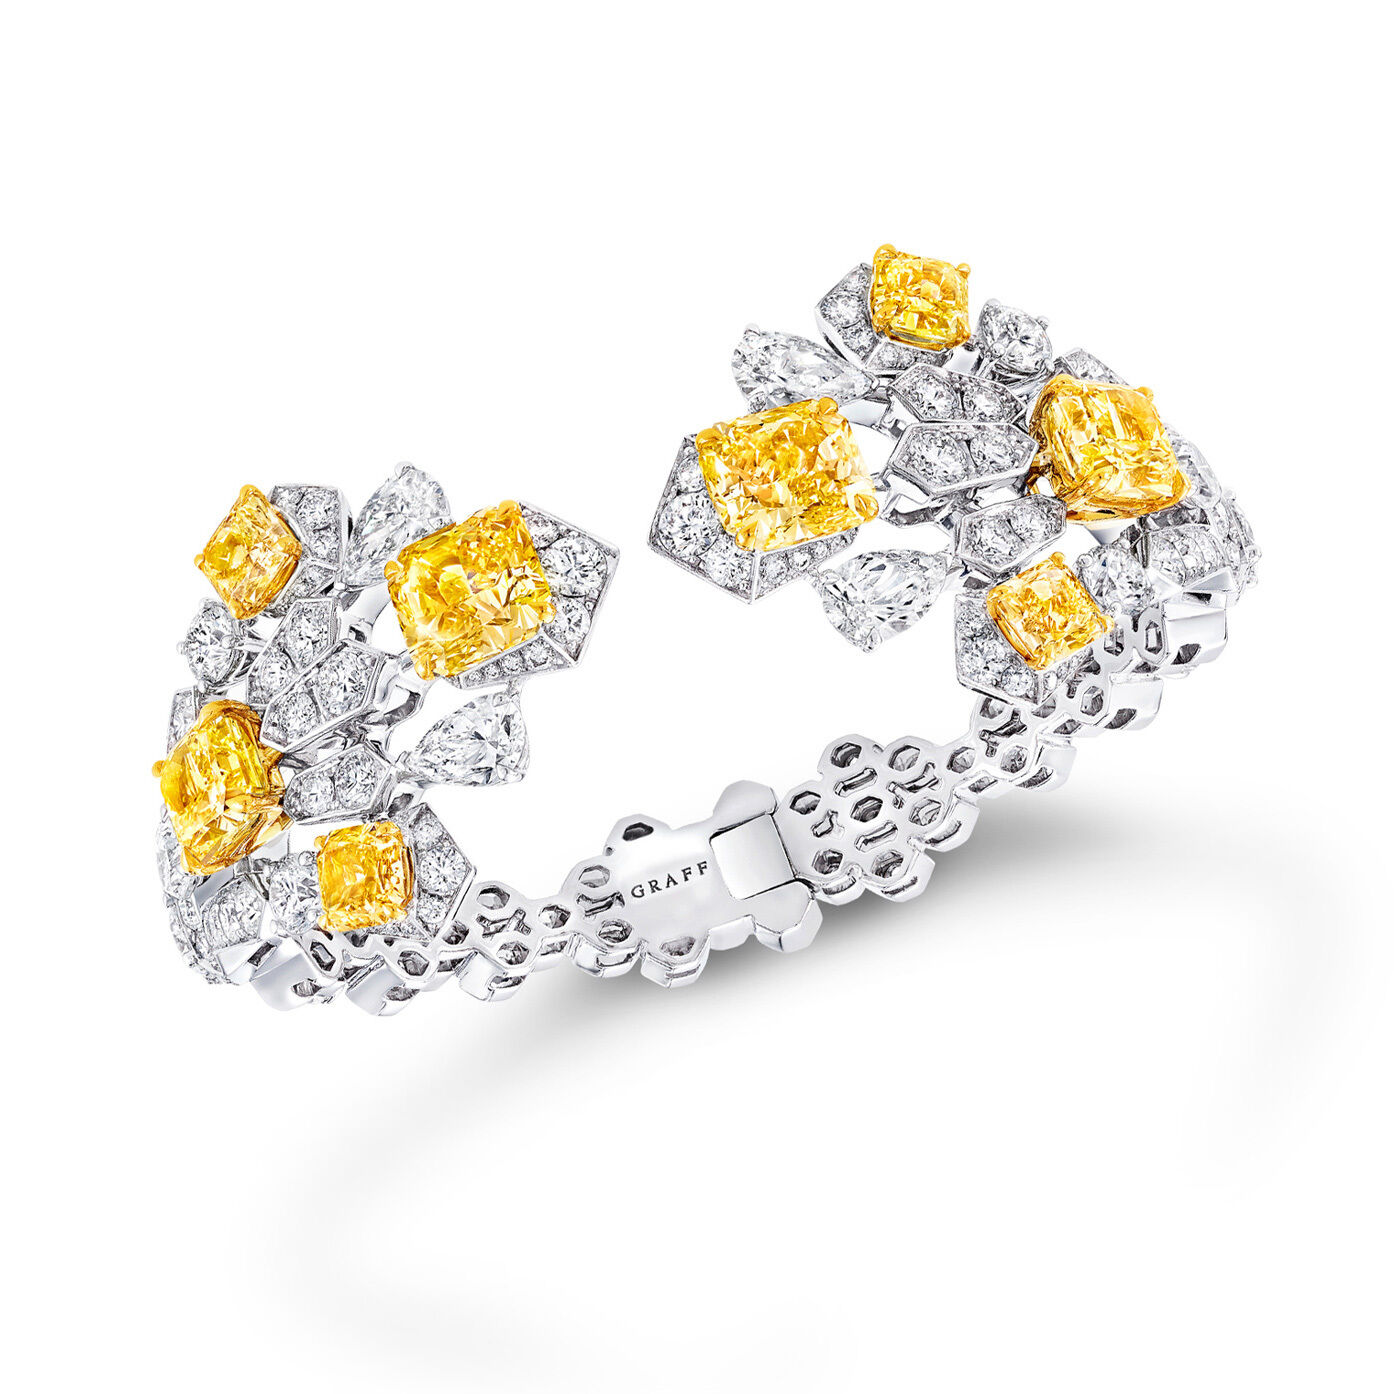 Yellow and white diamond high jewellery Night Moon earrings from the Graff Tribal collection